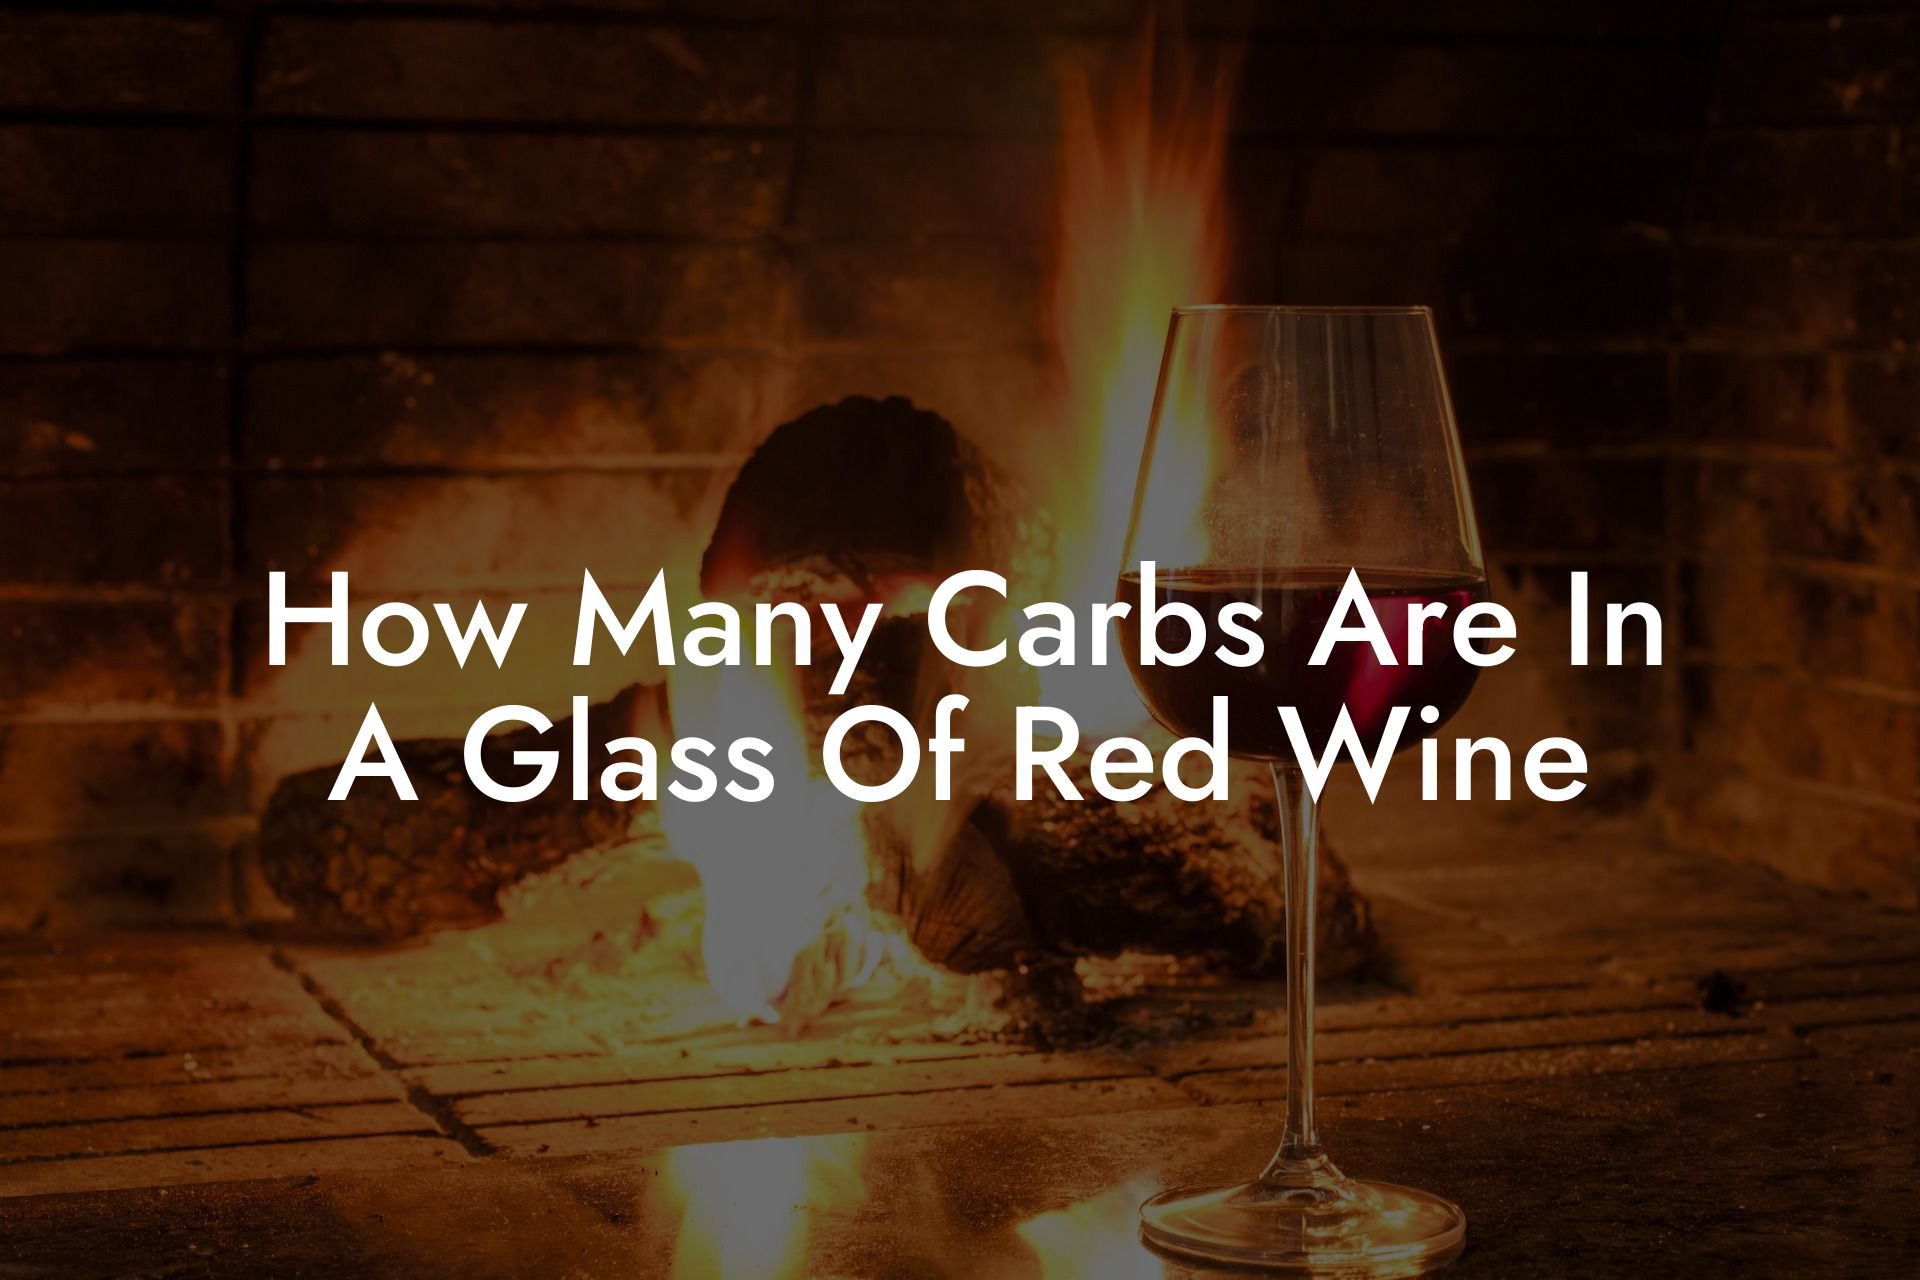 How Many Carbs Are In A Glass Of Red Wine